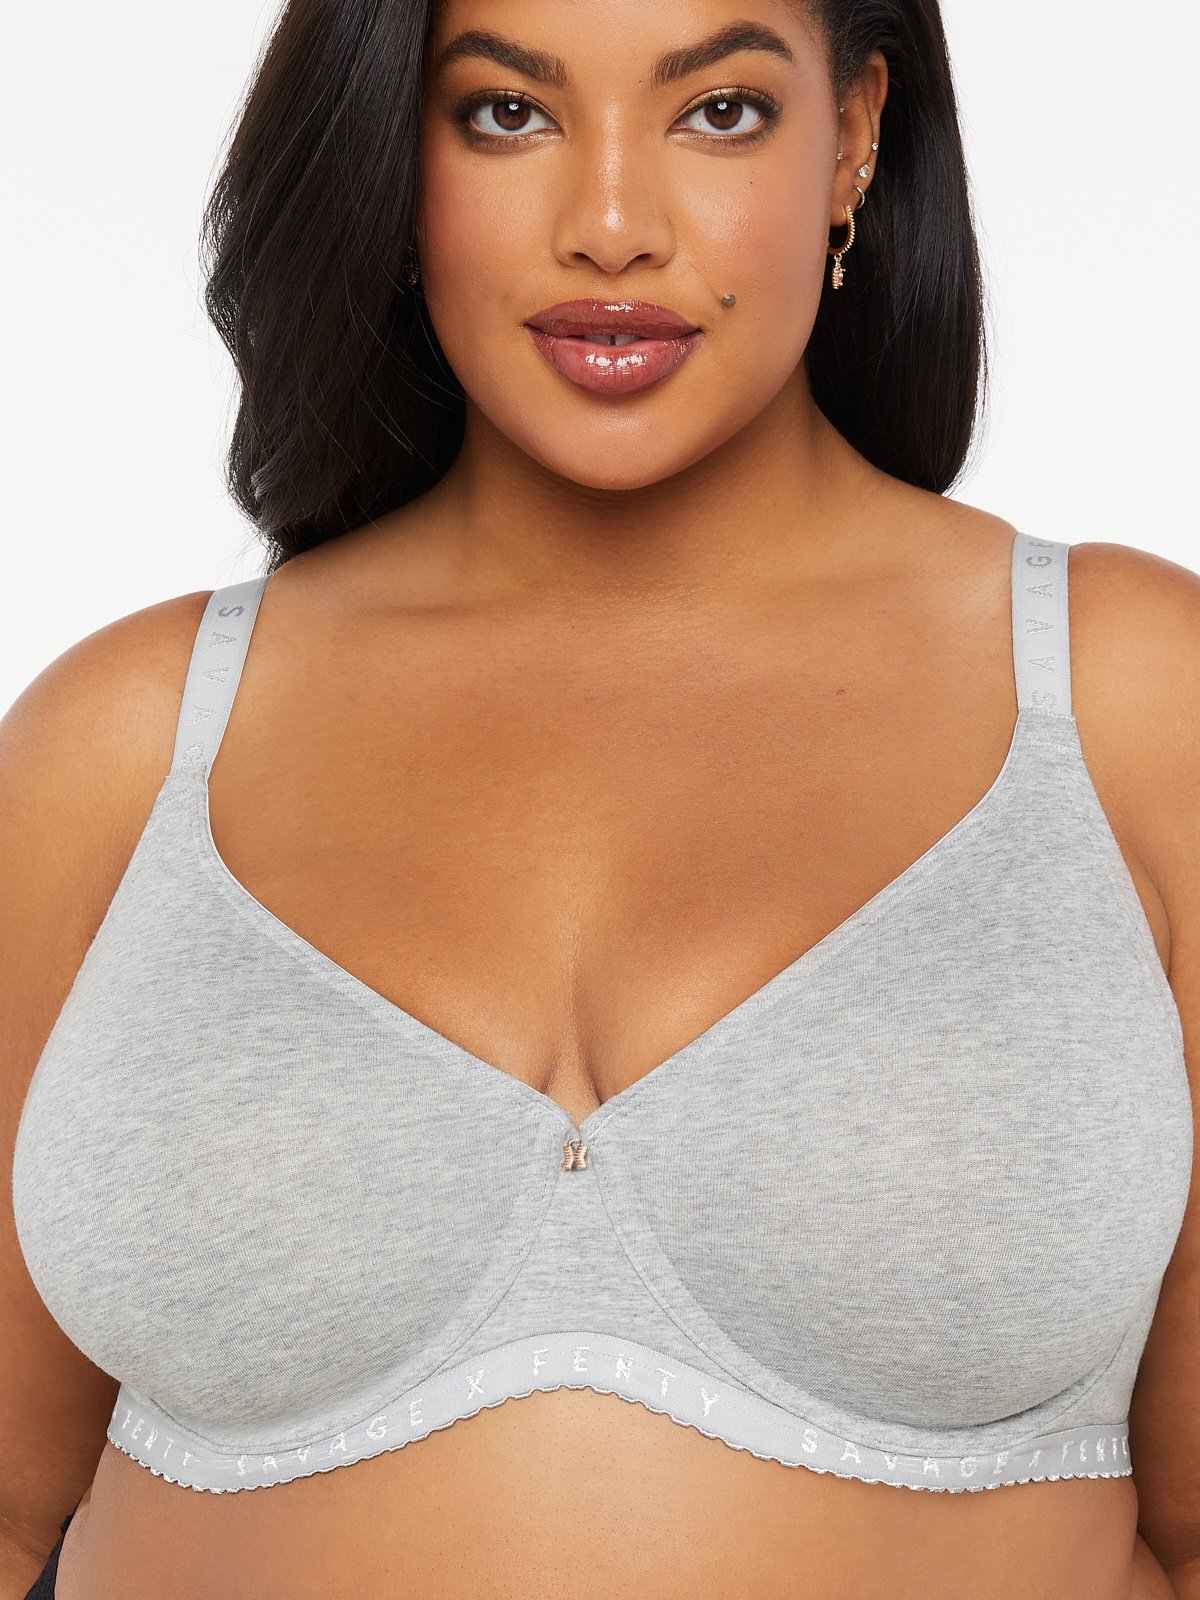 savage x fenty synthetic logo unlined bralette 1X - $45 - From Adrianna